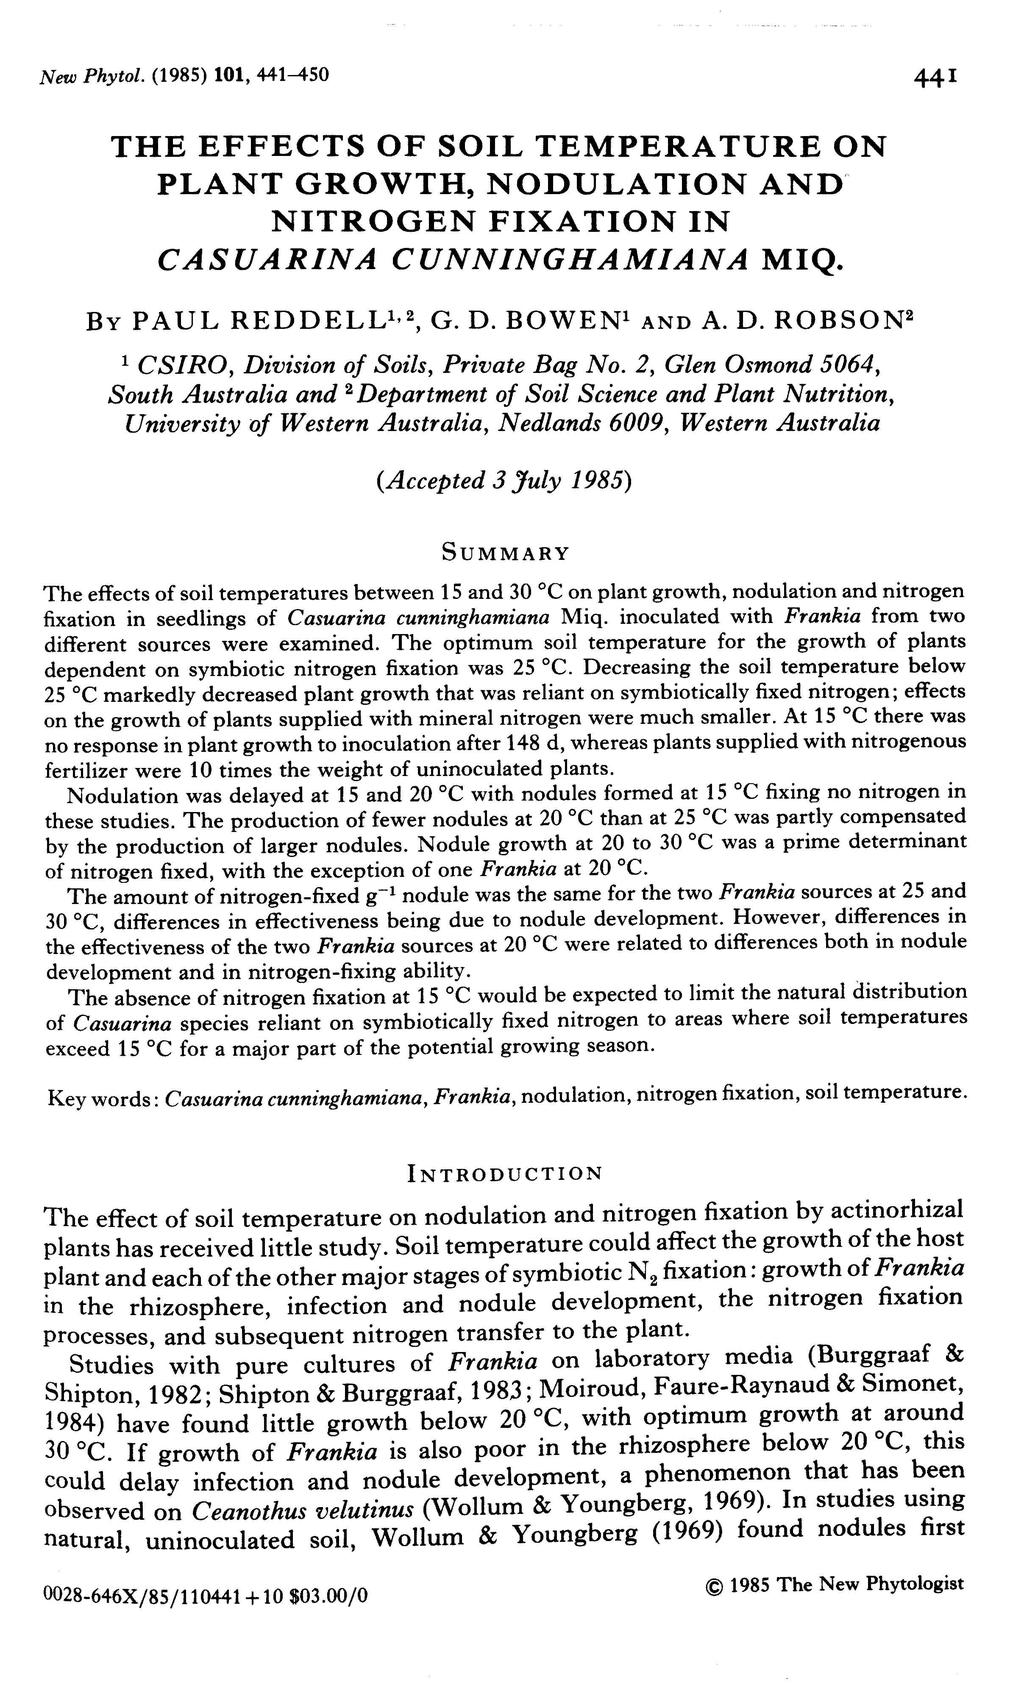 New Phytol. (1985) 11, 441^5 441 THE EFFECTS OF SOIL TEMPERATURE ON PLANT GROWTH, NODULATION AND NITROGEN FIXATION IN CASUARINA CUNNINGHAMIANA MIQ. BY PAUL REDDELLi'2, Q ^ BOWENi AND A. D.